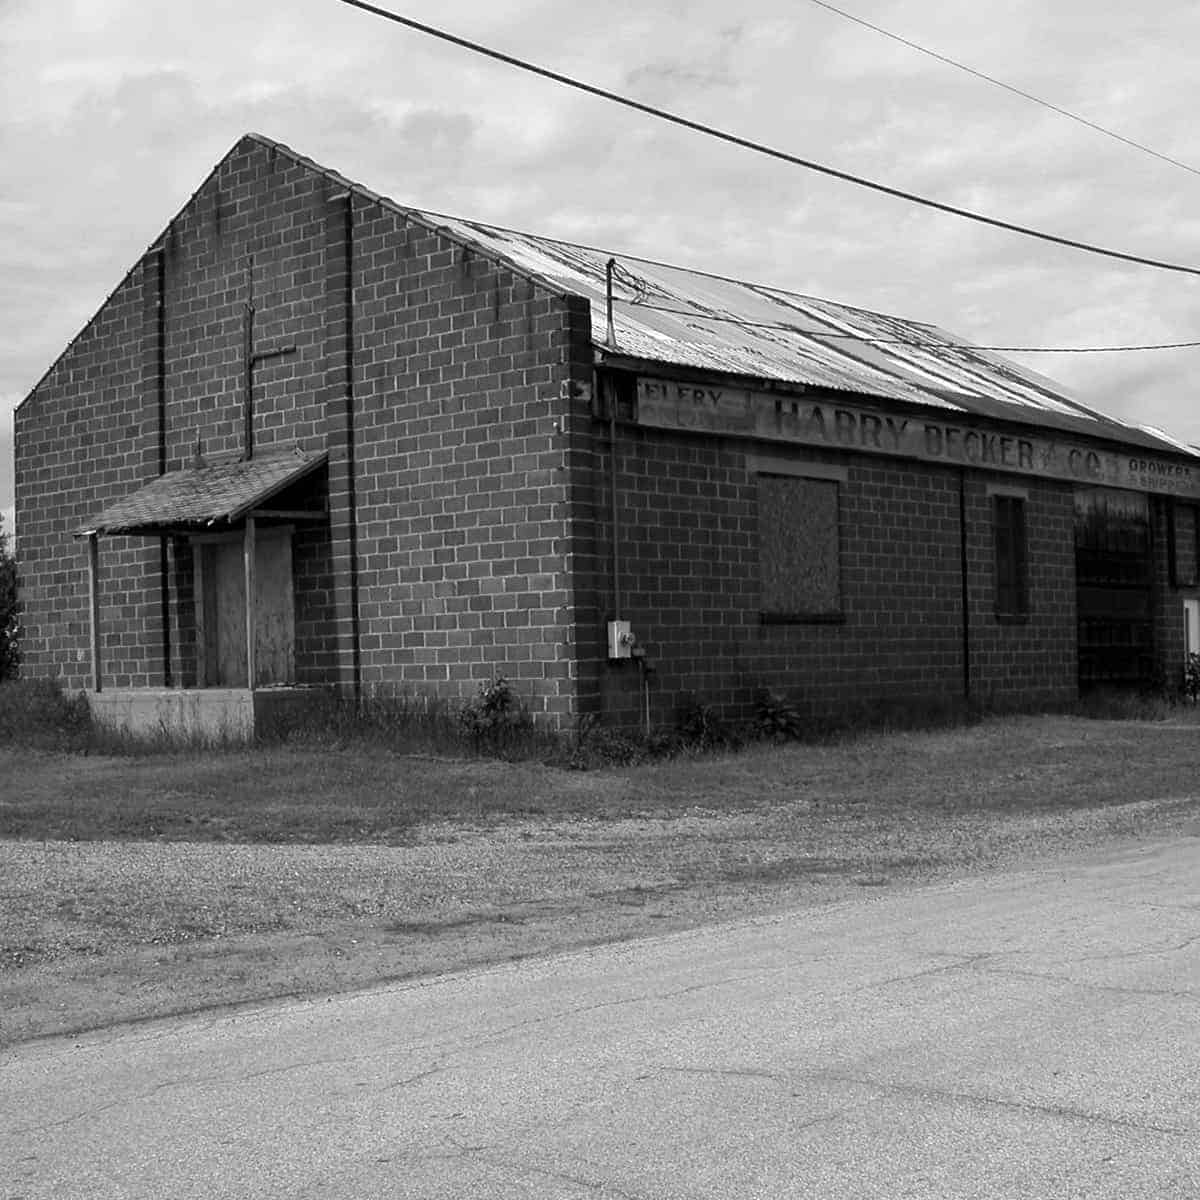 A black and white photo of an old building on the side of the road.